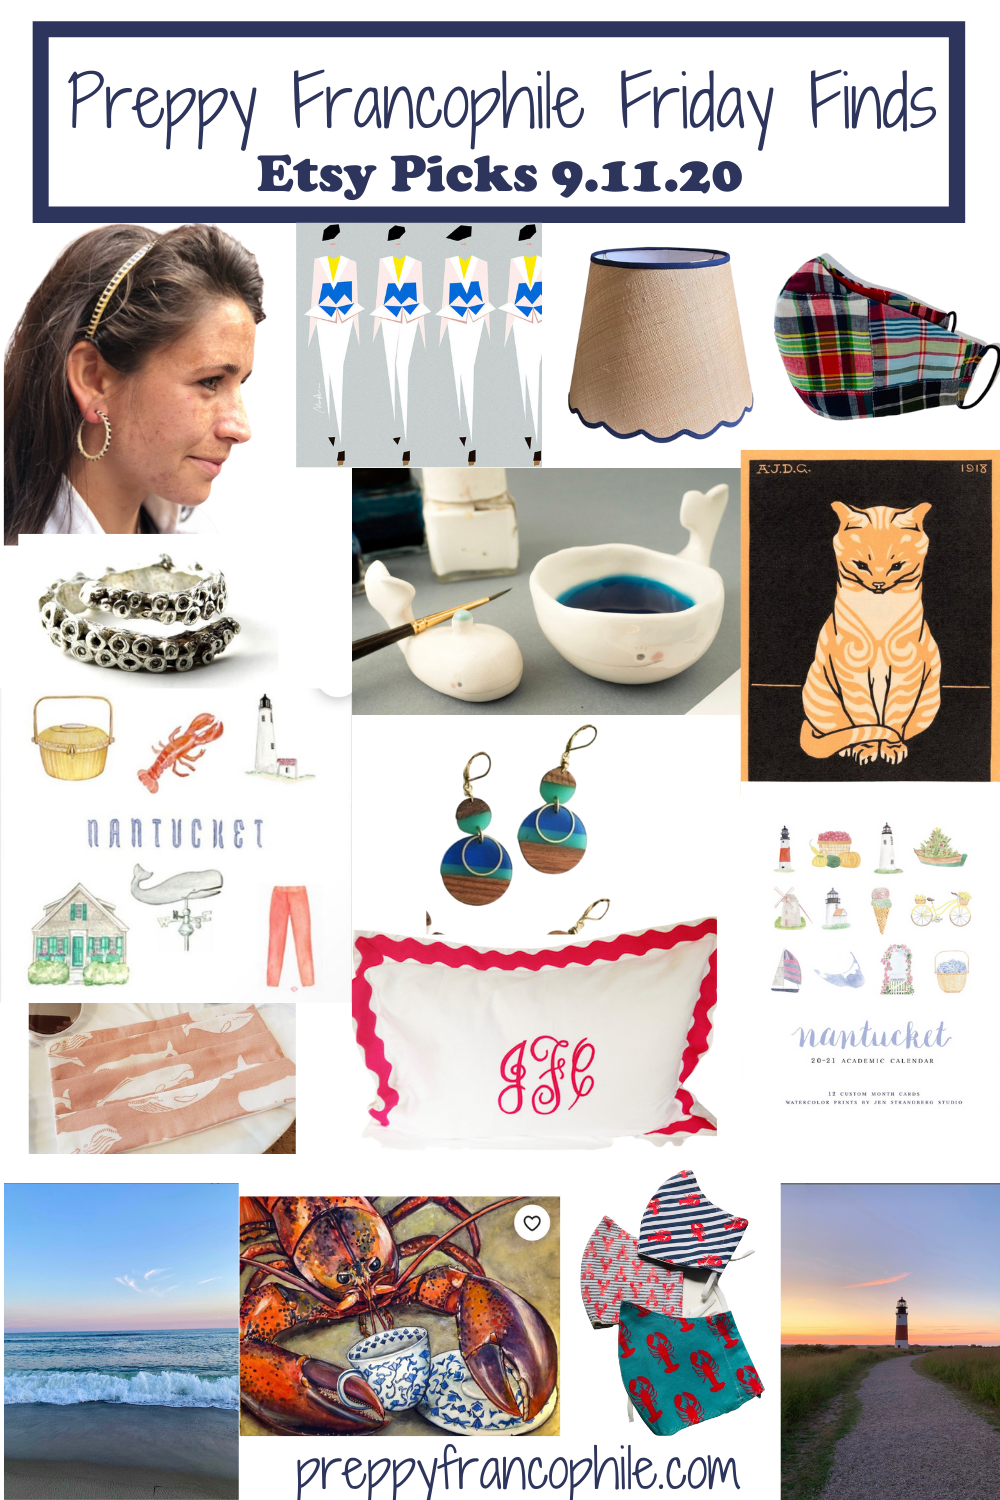 Friday Finds 9.11.20 – Etsy